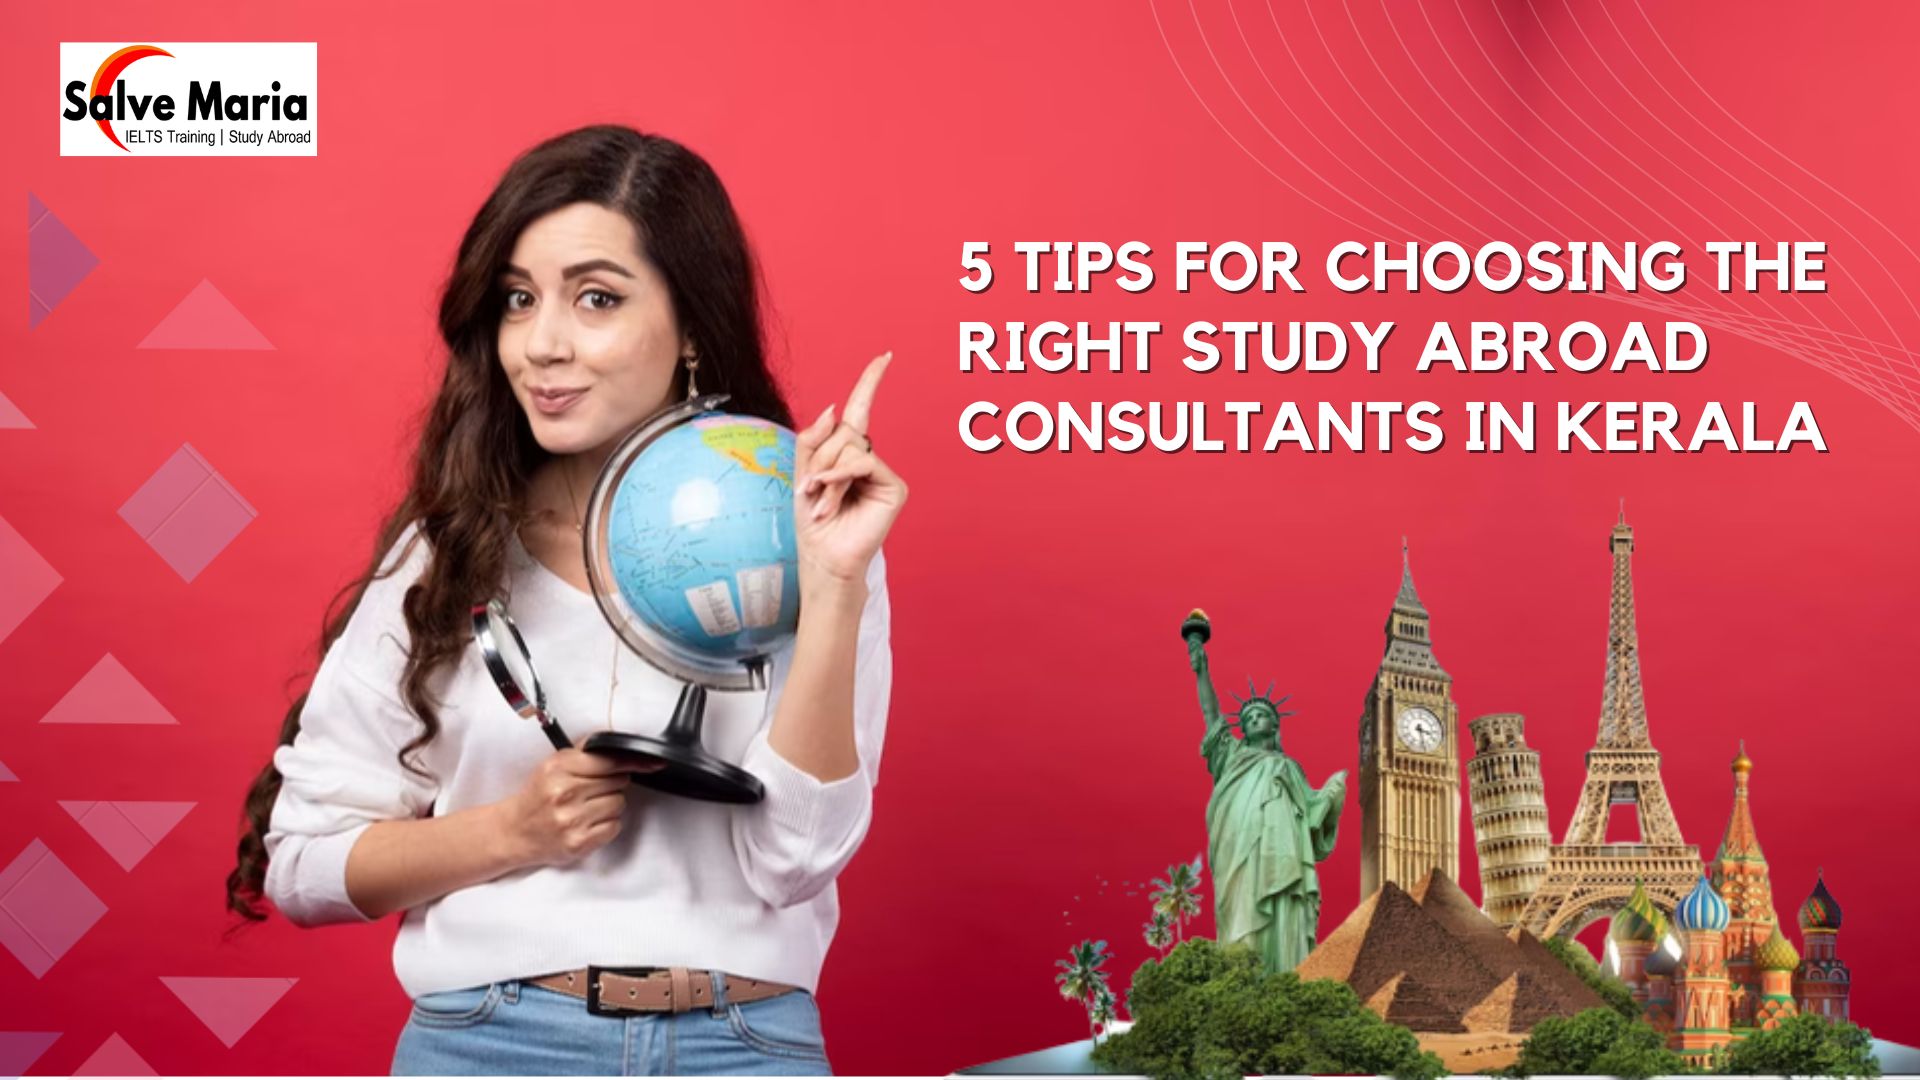 5 Tips for Choosing the Right Study Abroad Consultant